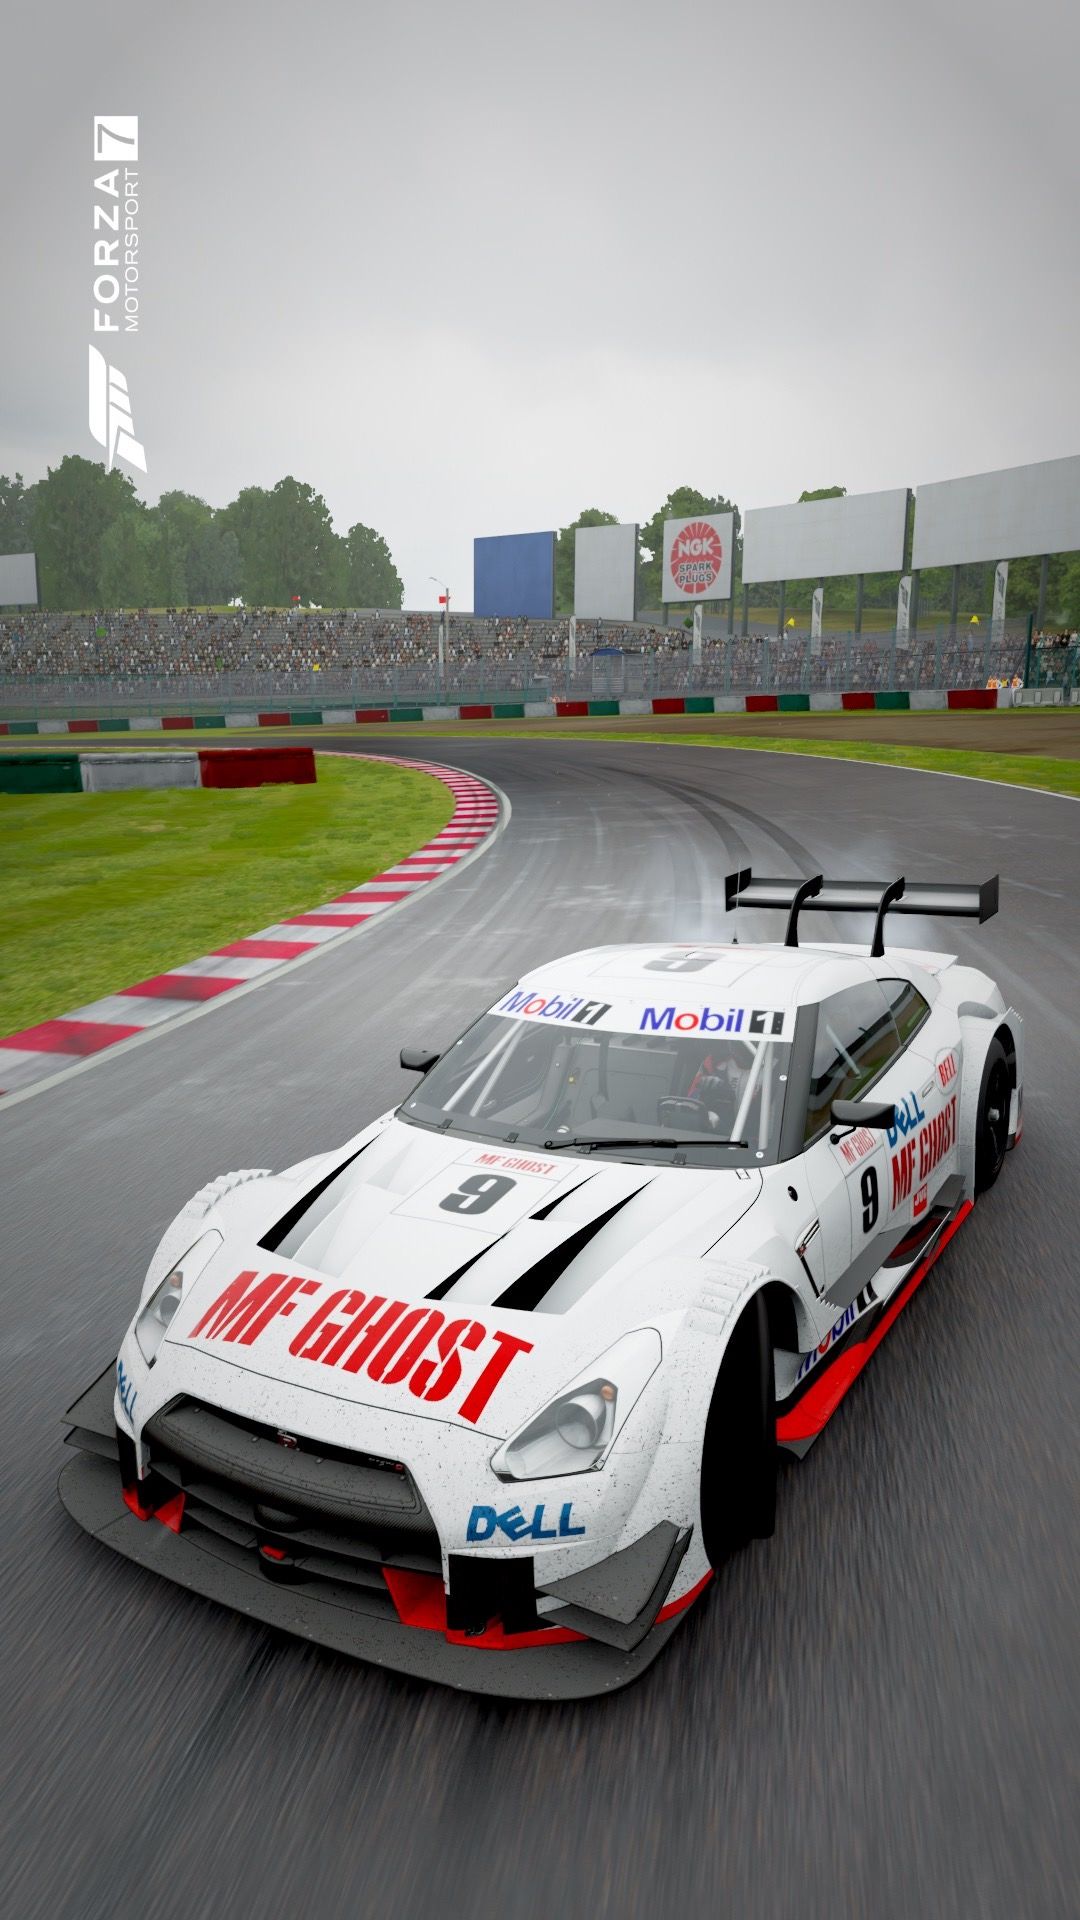 I Made An MF Ghost Inspired Livery For The Nismo GT R Race Car In Forza 7!